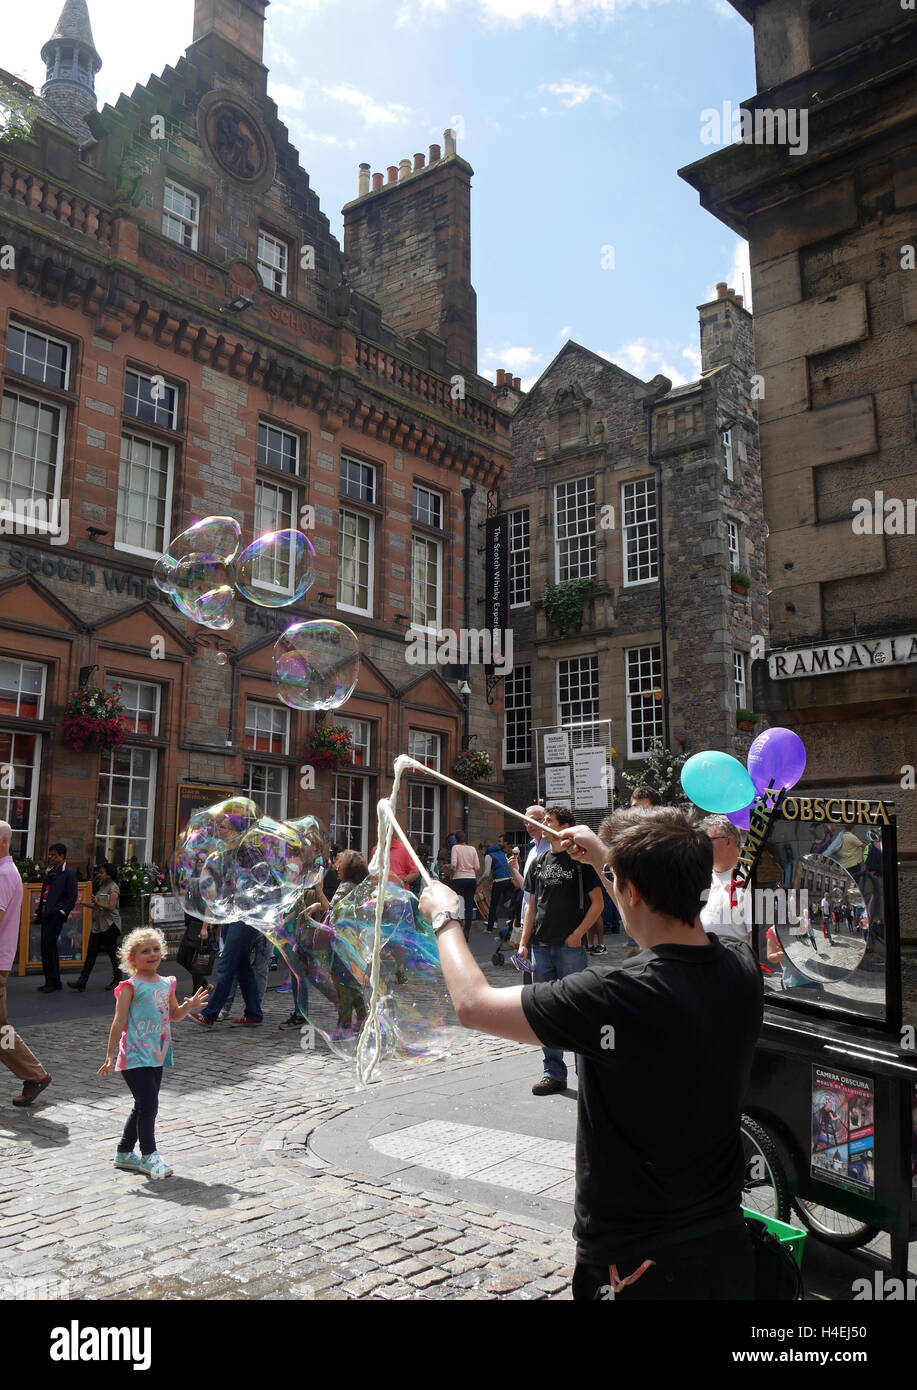 Street Entertainer creating gigantic Bubbles in The Old Town of The City of Edinburgh, Scotland, UK Stock Photo